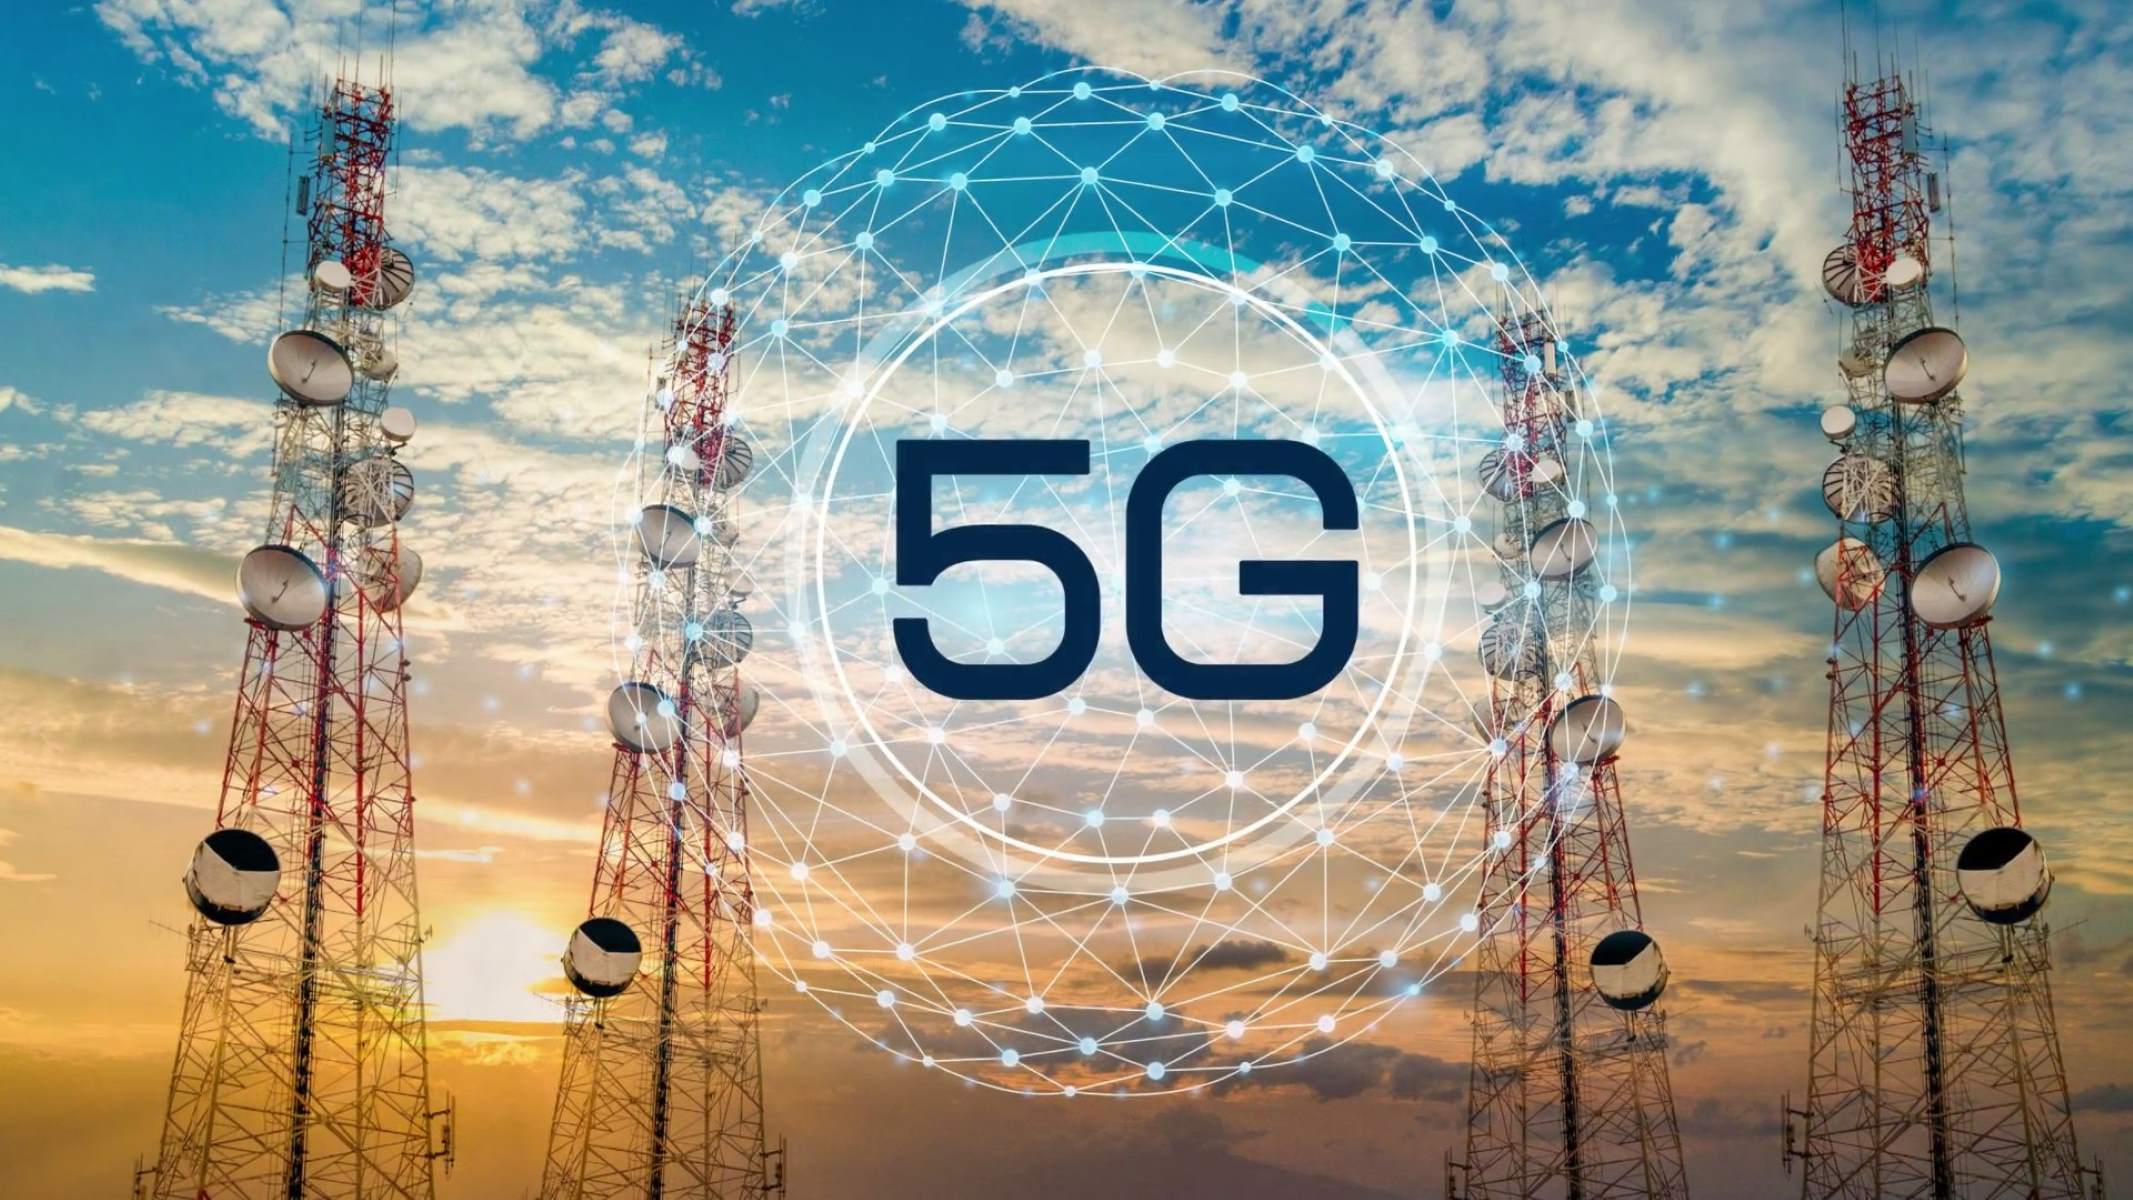 What Is A Benefit Of 5G mmWave Technology?